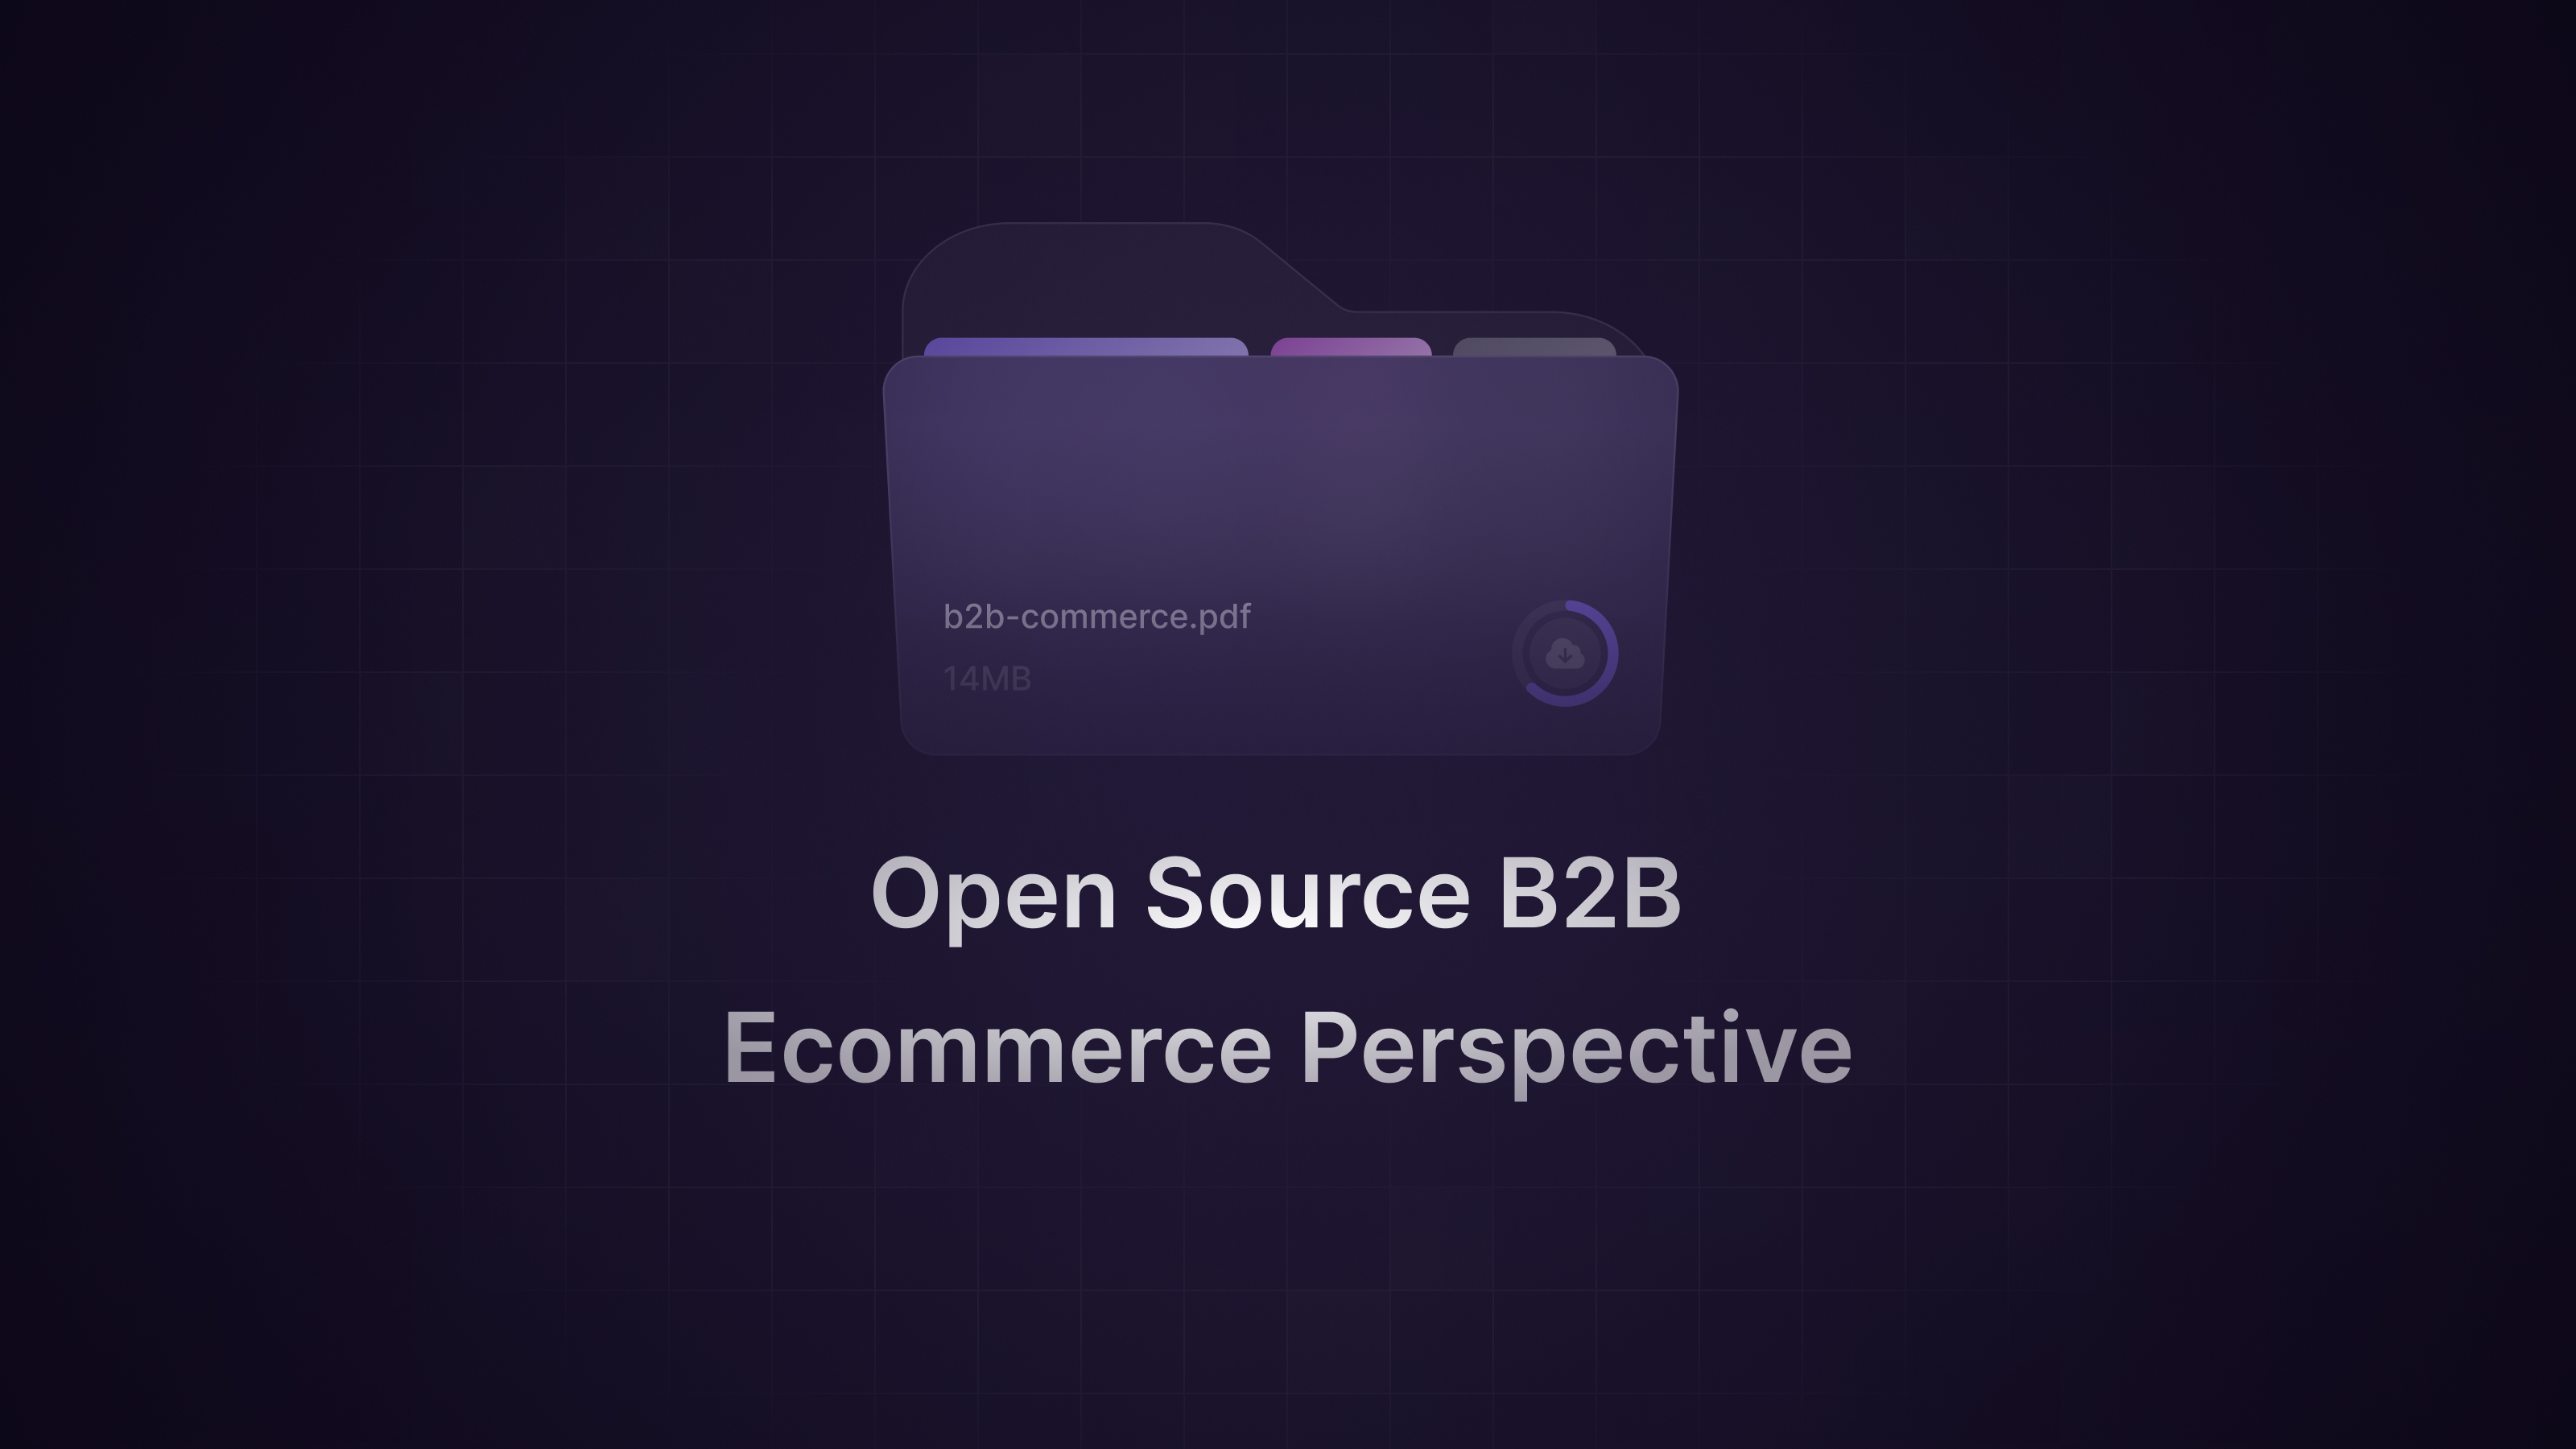 Open Source B2B Ecommerce an industry perspective